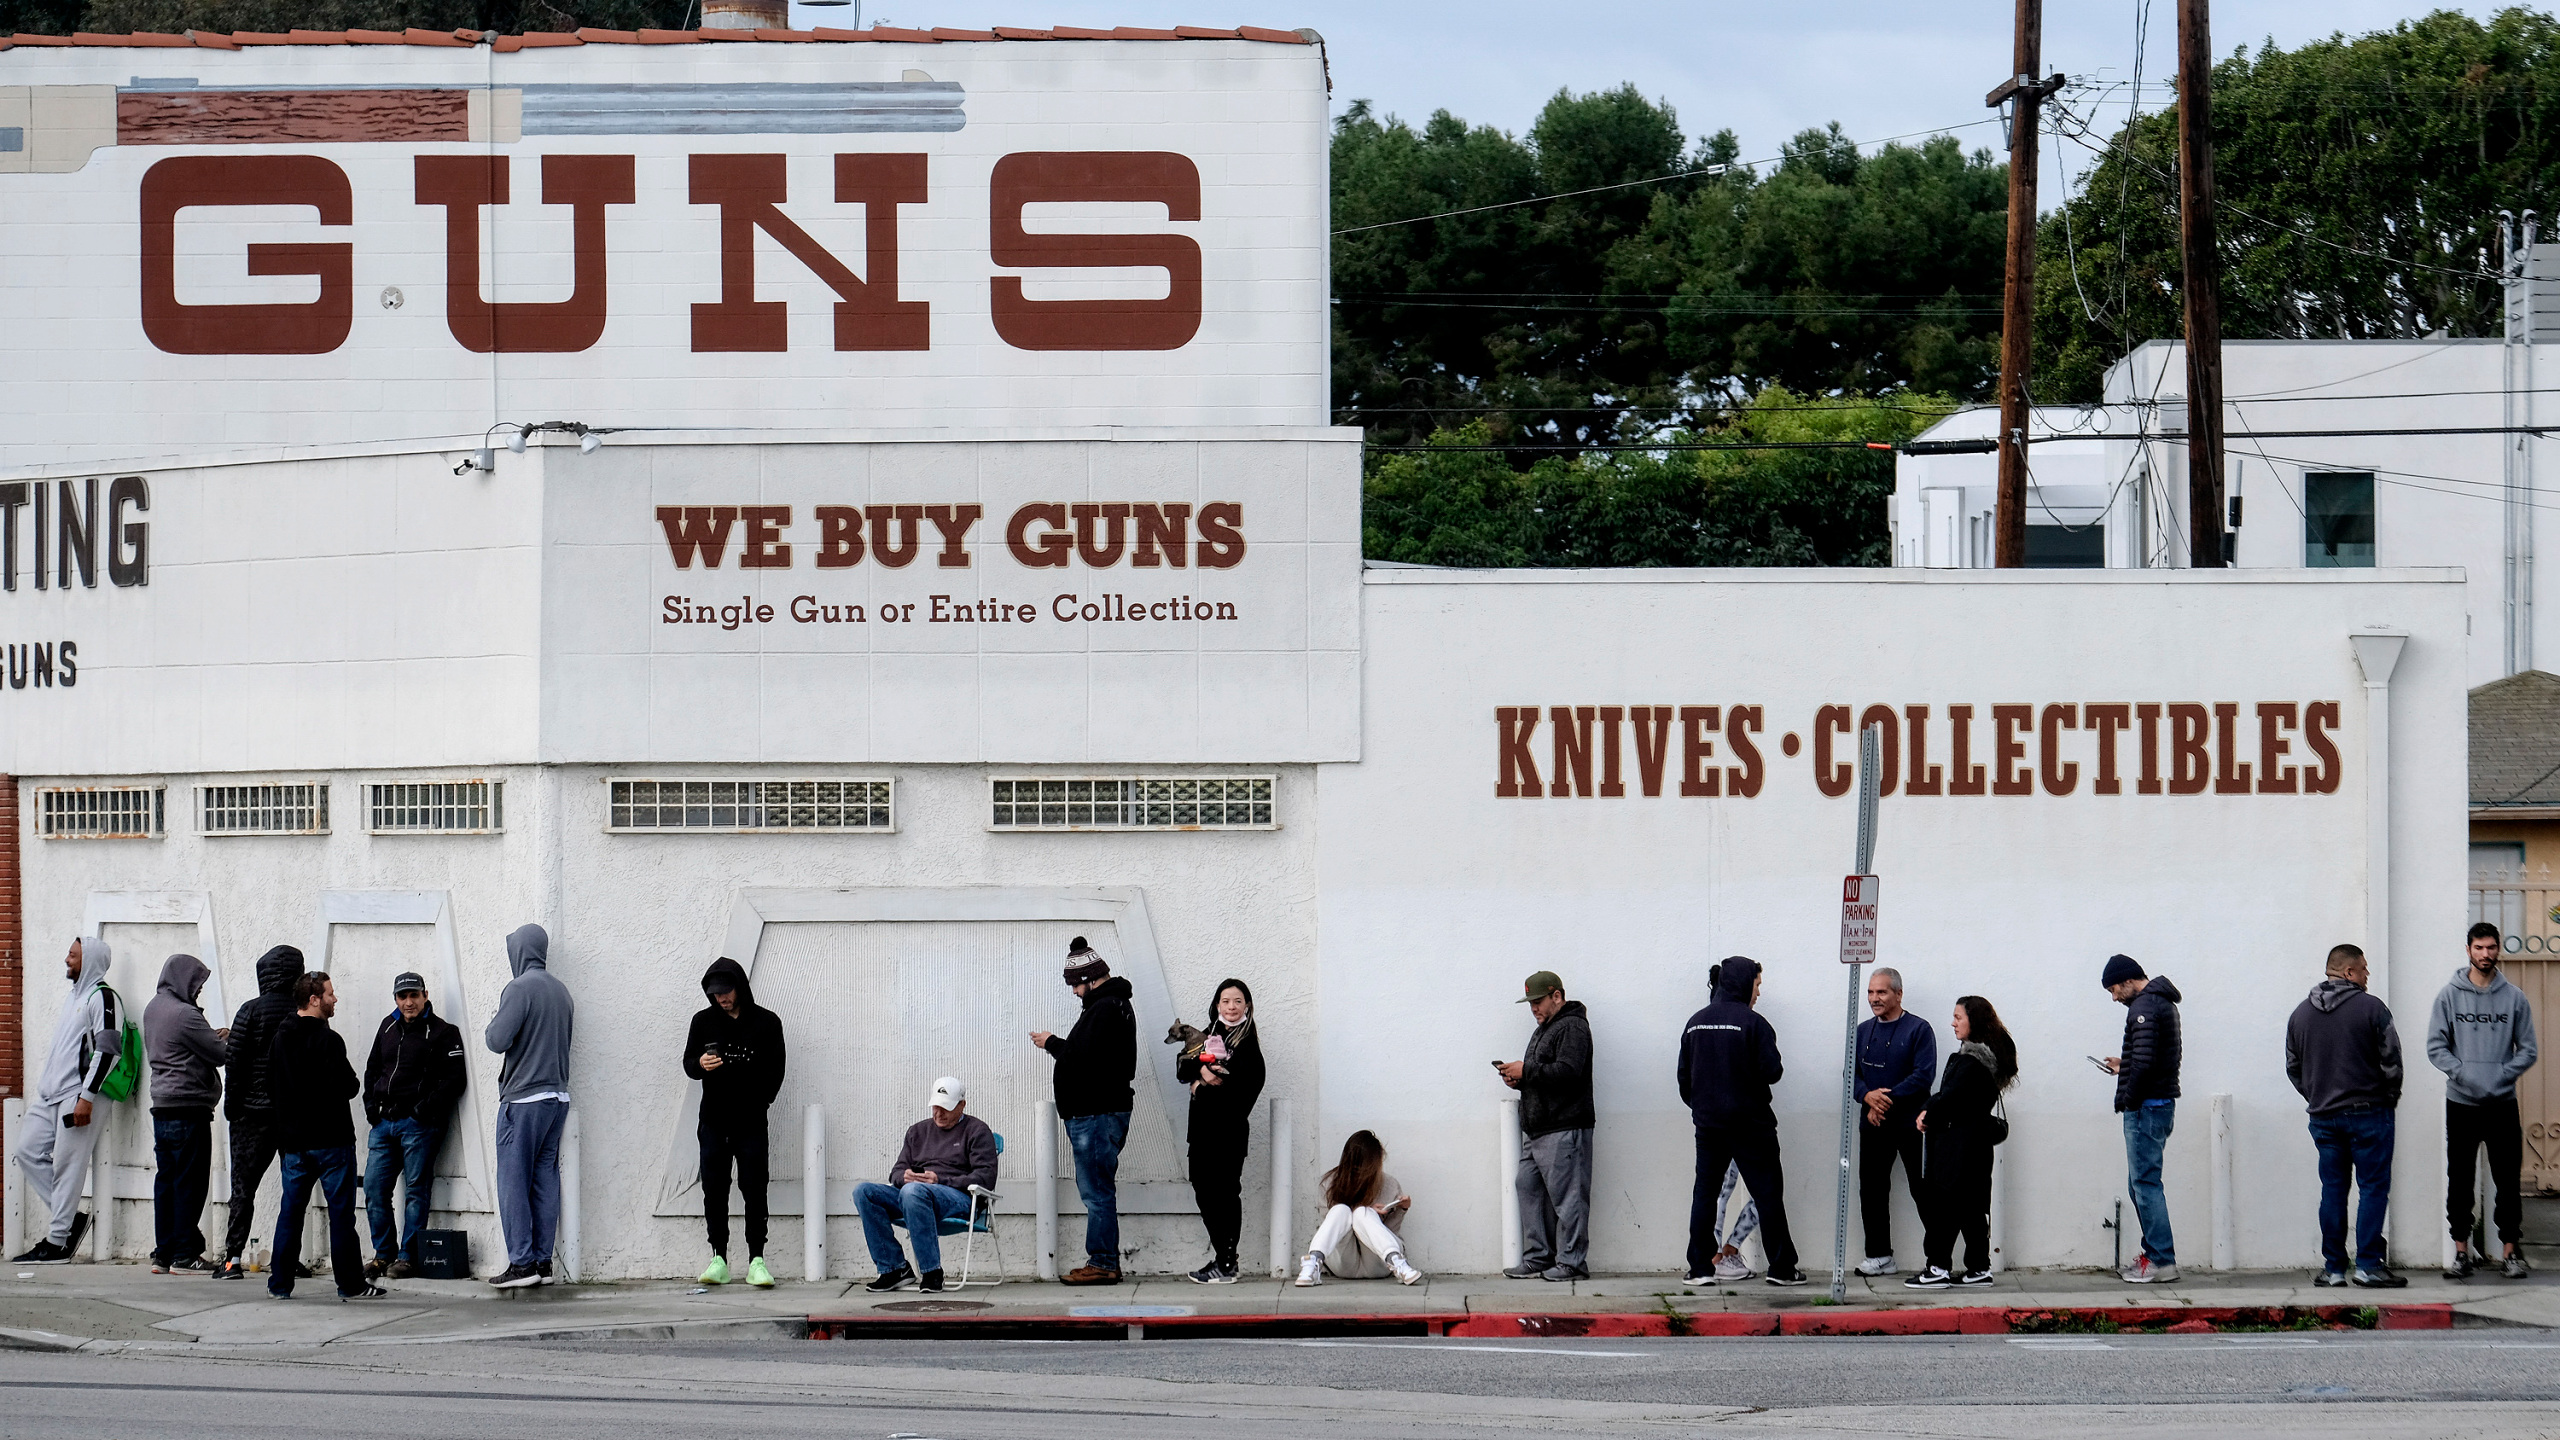 People wait in a line to enter a gun store in Culver City, California, the U.S., March 15, 2020. /AP